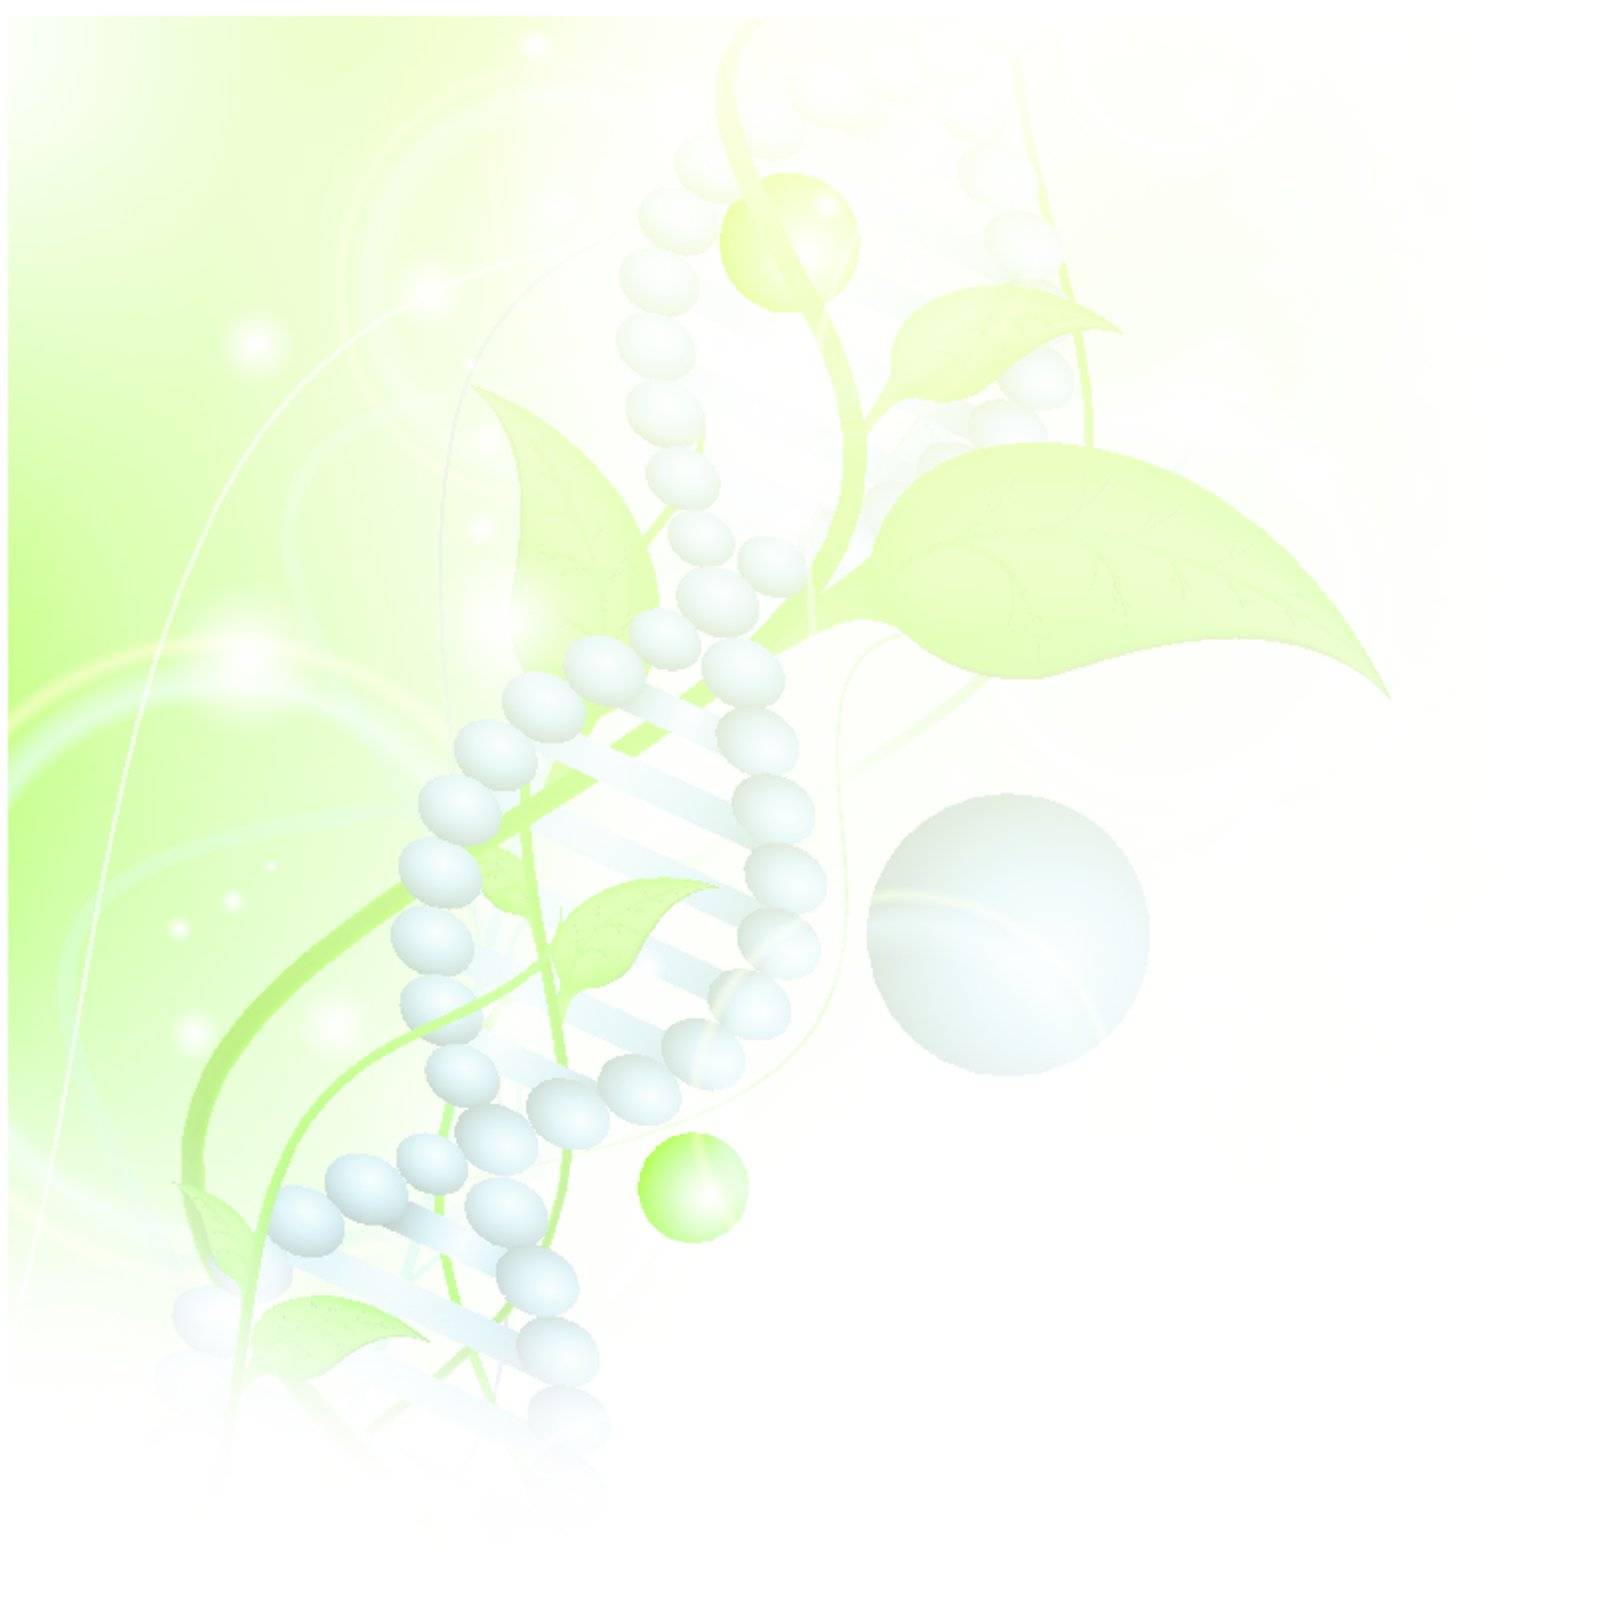 Organic Science theme with DNA and sprout over green background